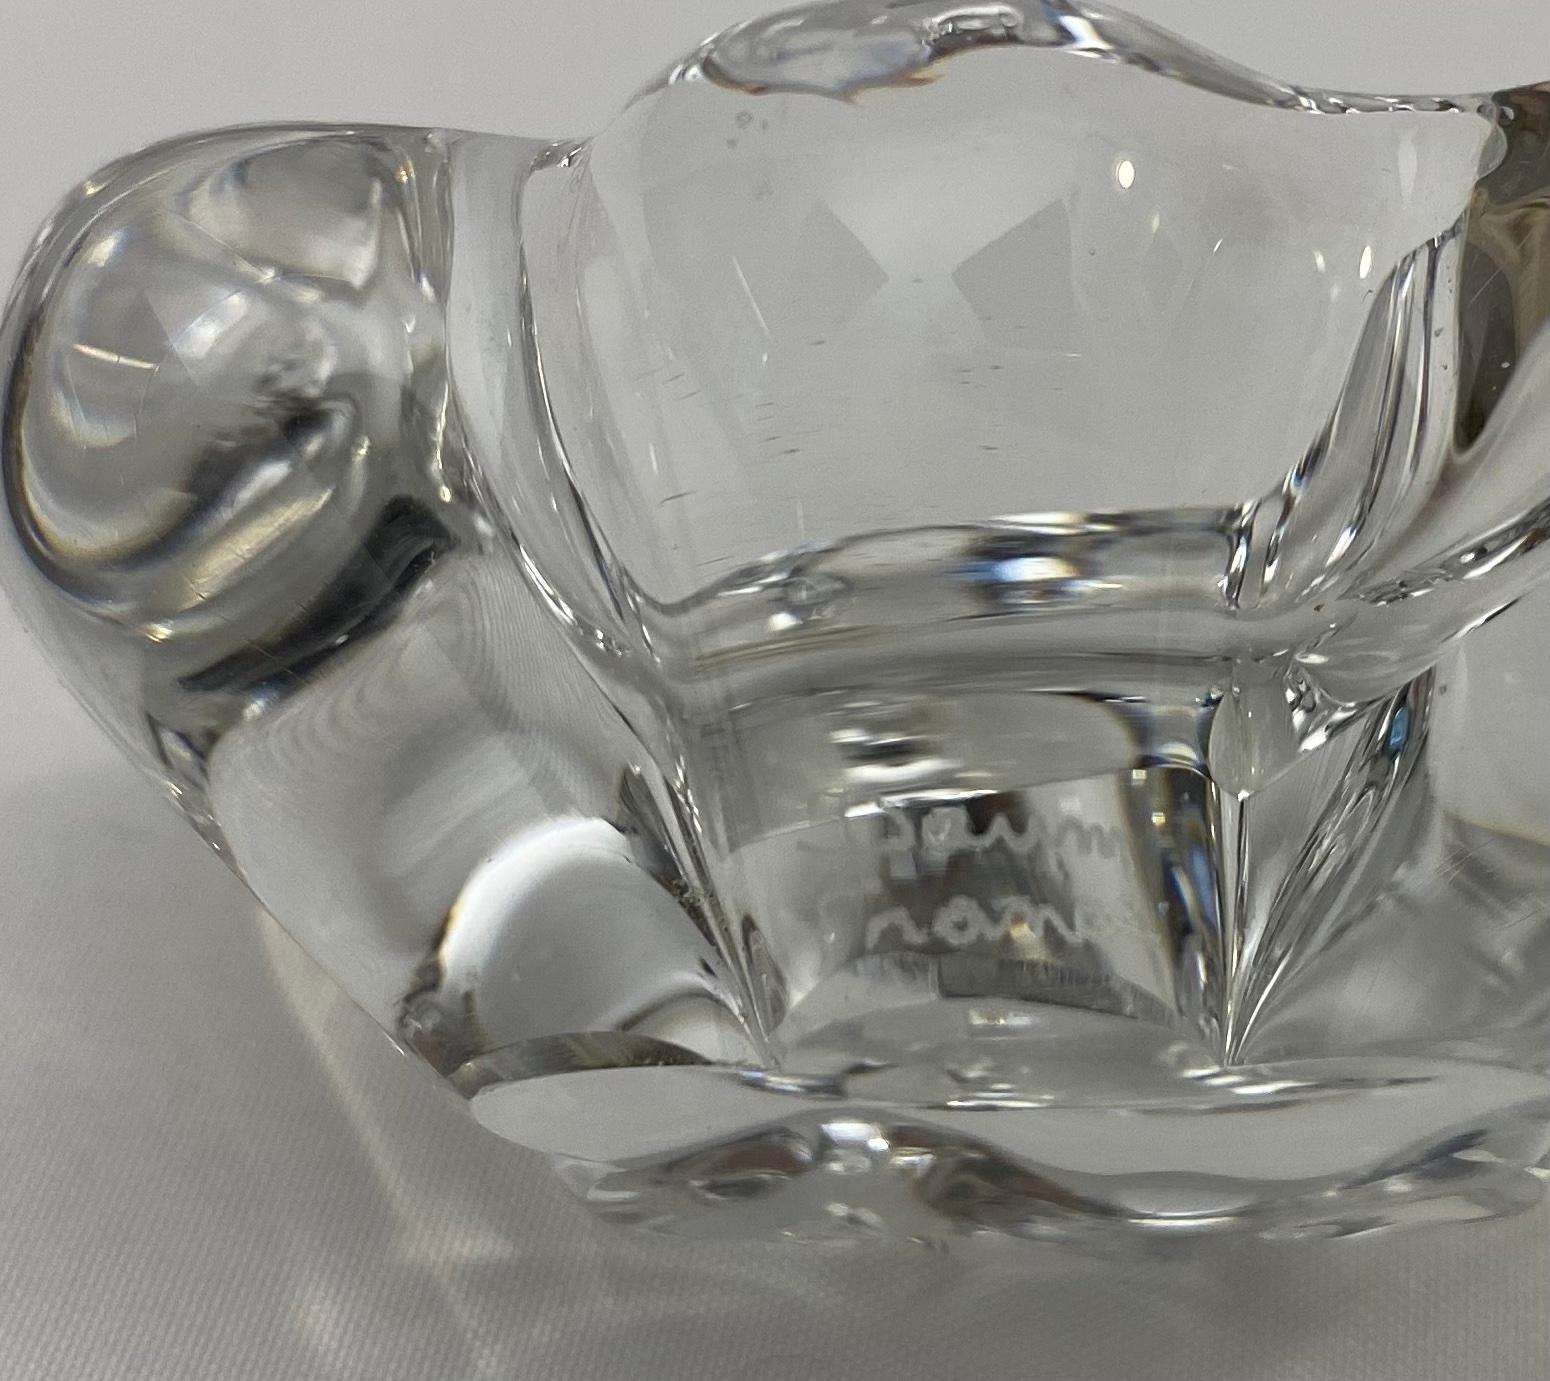 Set of 2 Daum Salt and Pepper Crystal Serving Dishes by Daum France Signed For Sale 3